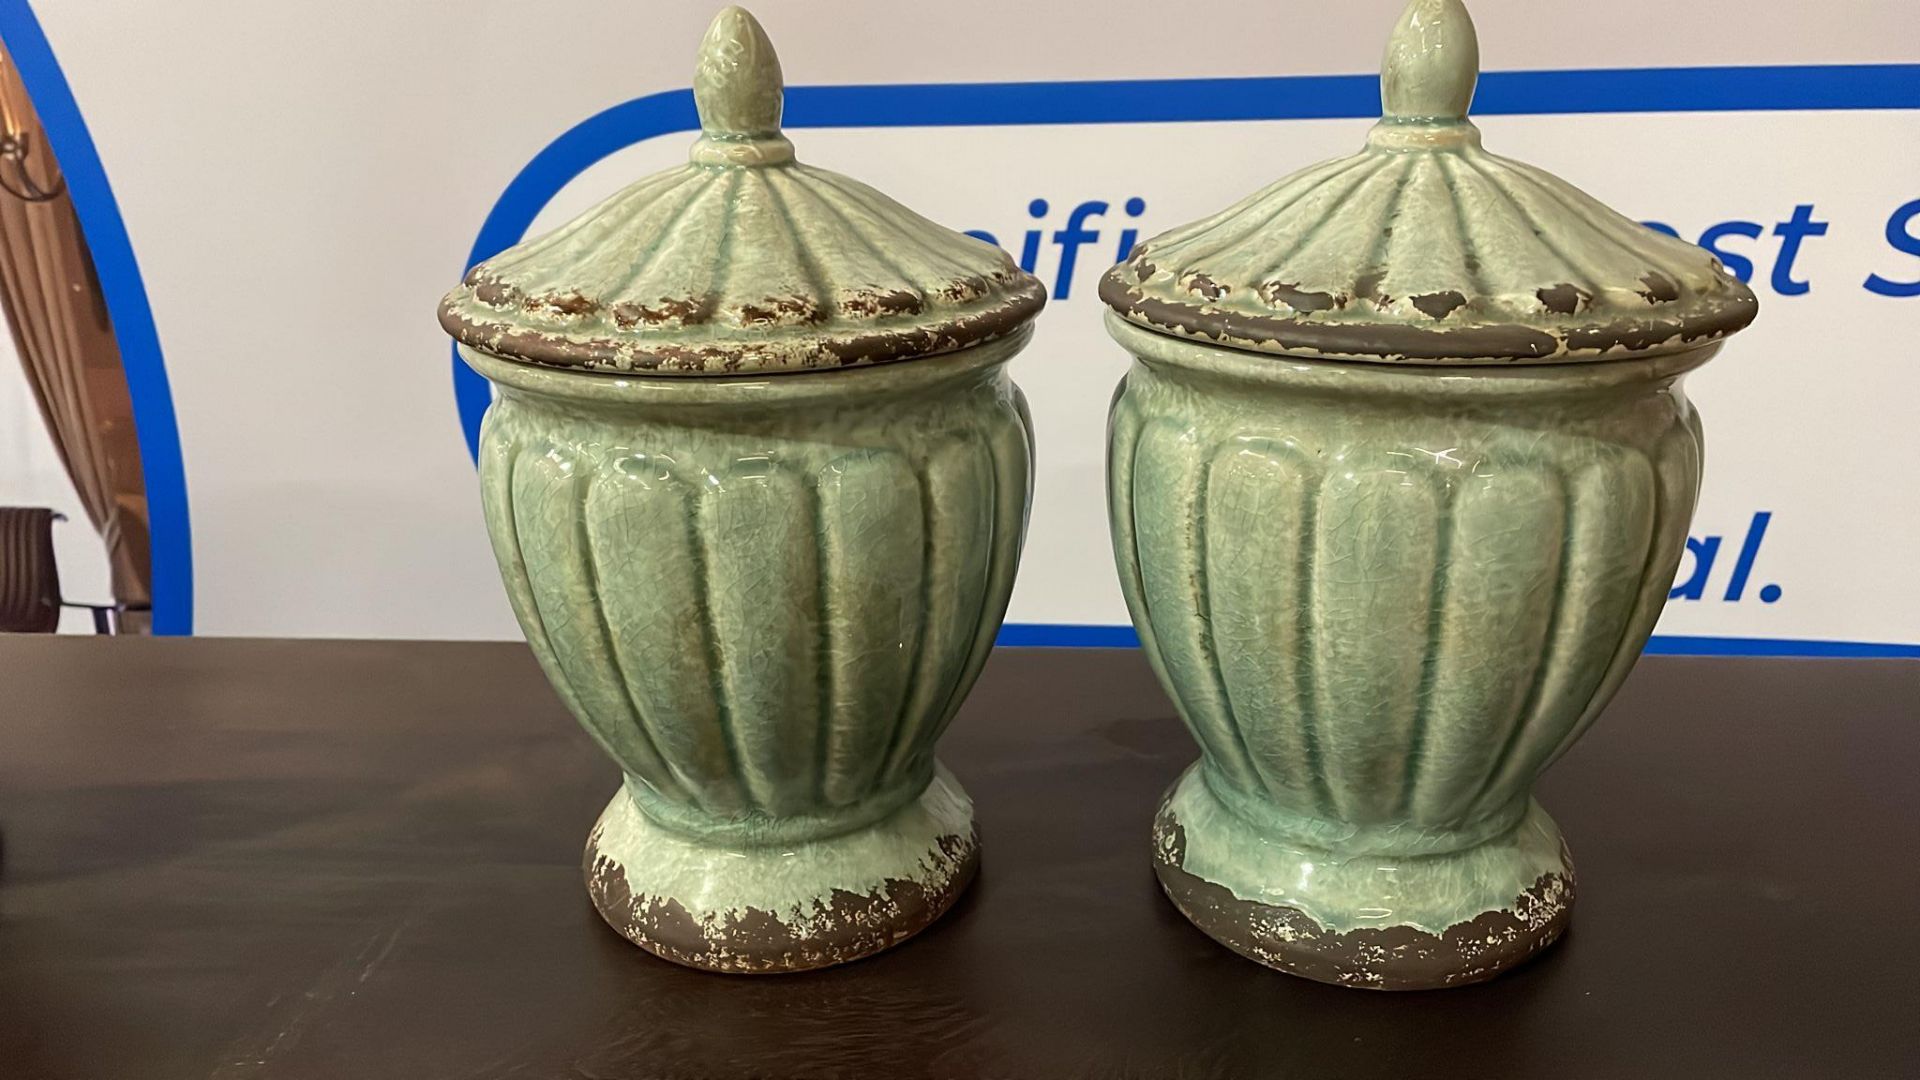 2 x Glazed Ceramic Urns with lid . Beautiful pair of Urns featuring a ridged pattern with a